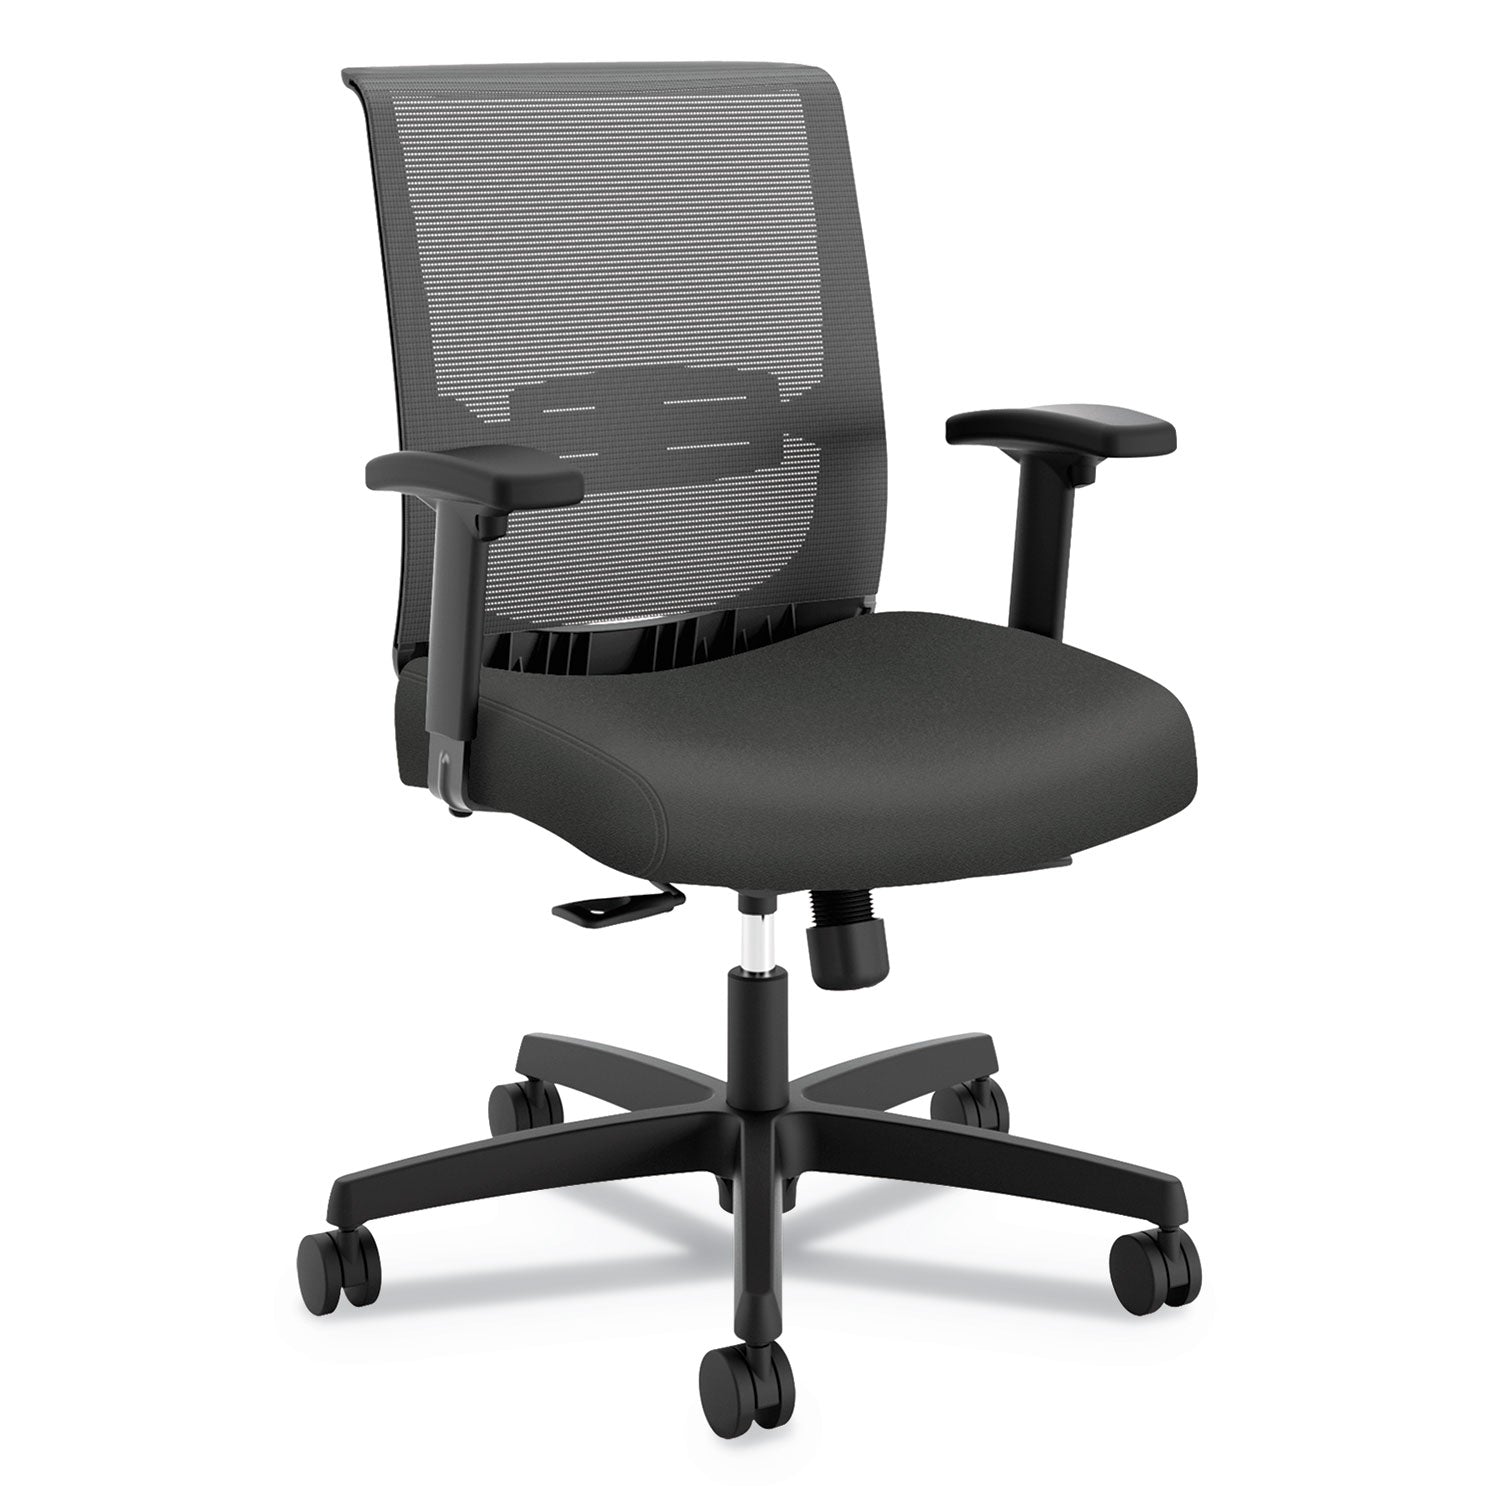 convergence-mid-back-task-chair-synchro-tilt-and-seat-glide-supports-up-to-275-lb-iron-ore-seat-black-back-base_honcmy1acu19 - 1